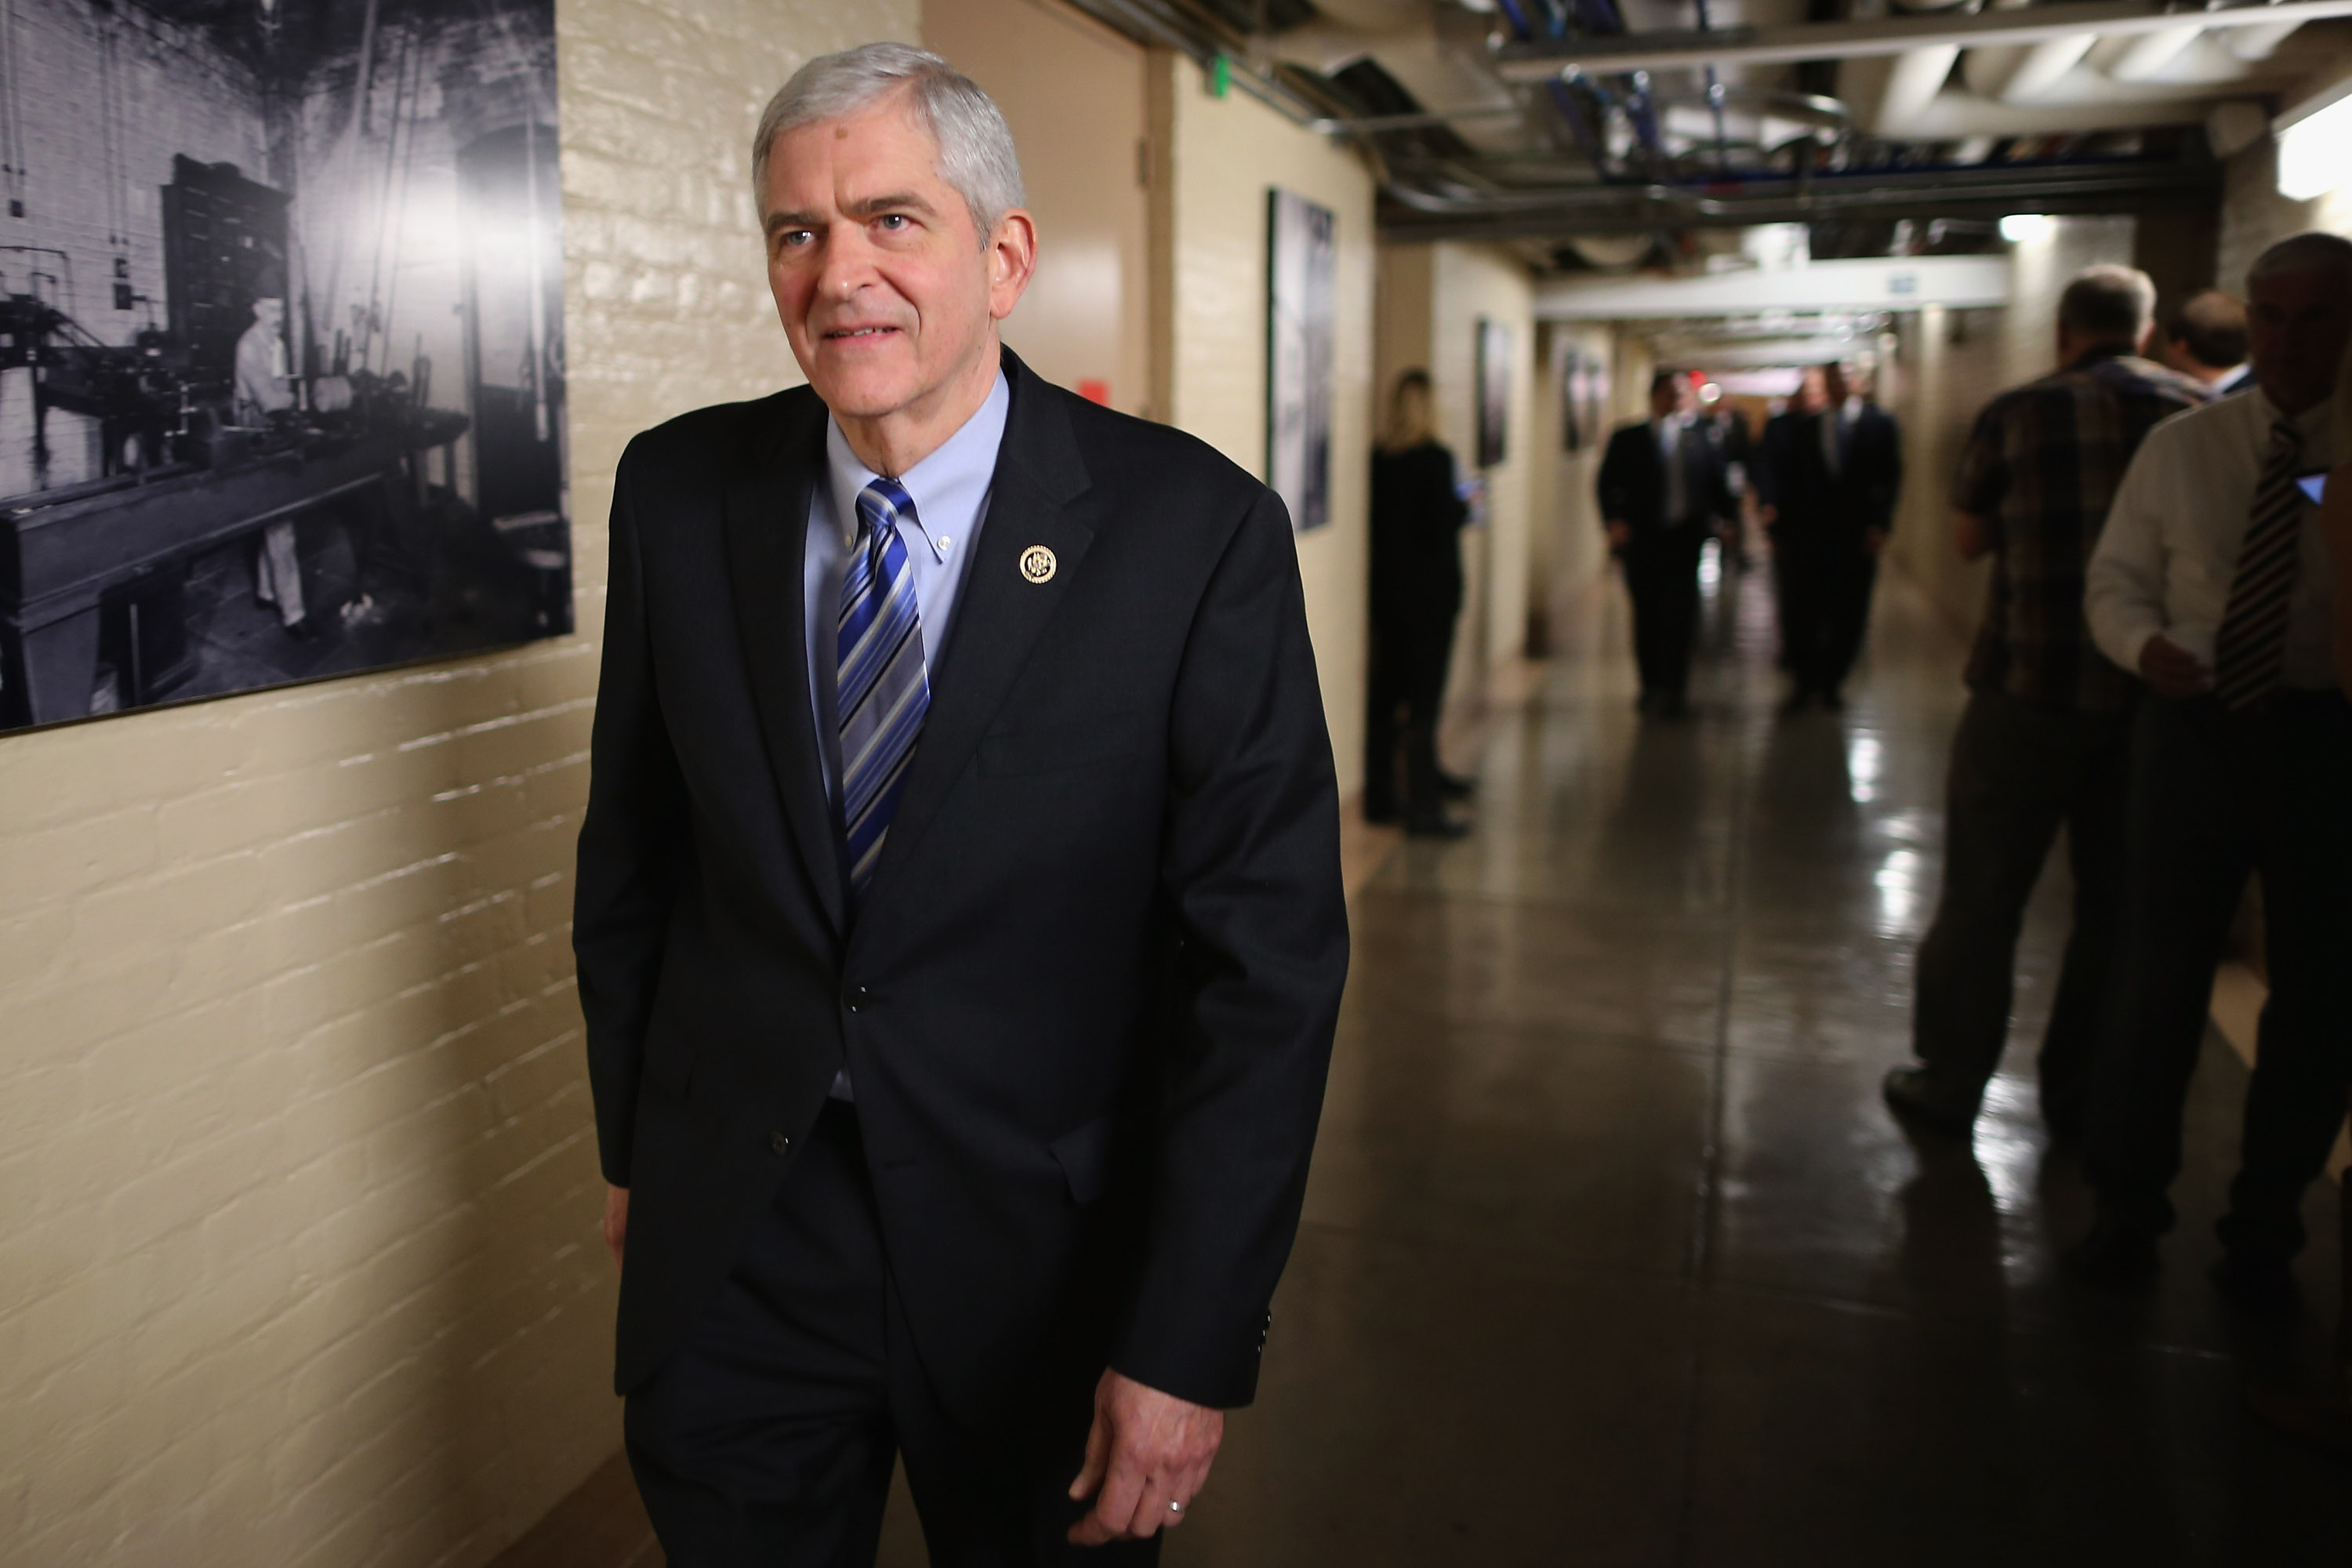 Rep. Daniel Webster (R-FL) heads for a House Republican caucus meeting in the basement of the U.S. Capitol in Washington, D.C., on Oct. 9, 2015. (Chip Somodevilla—Getty Images)